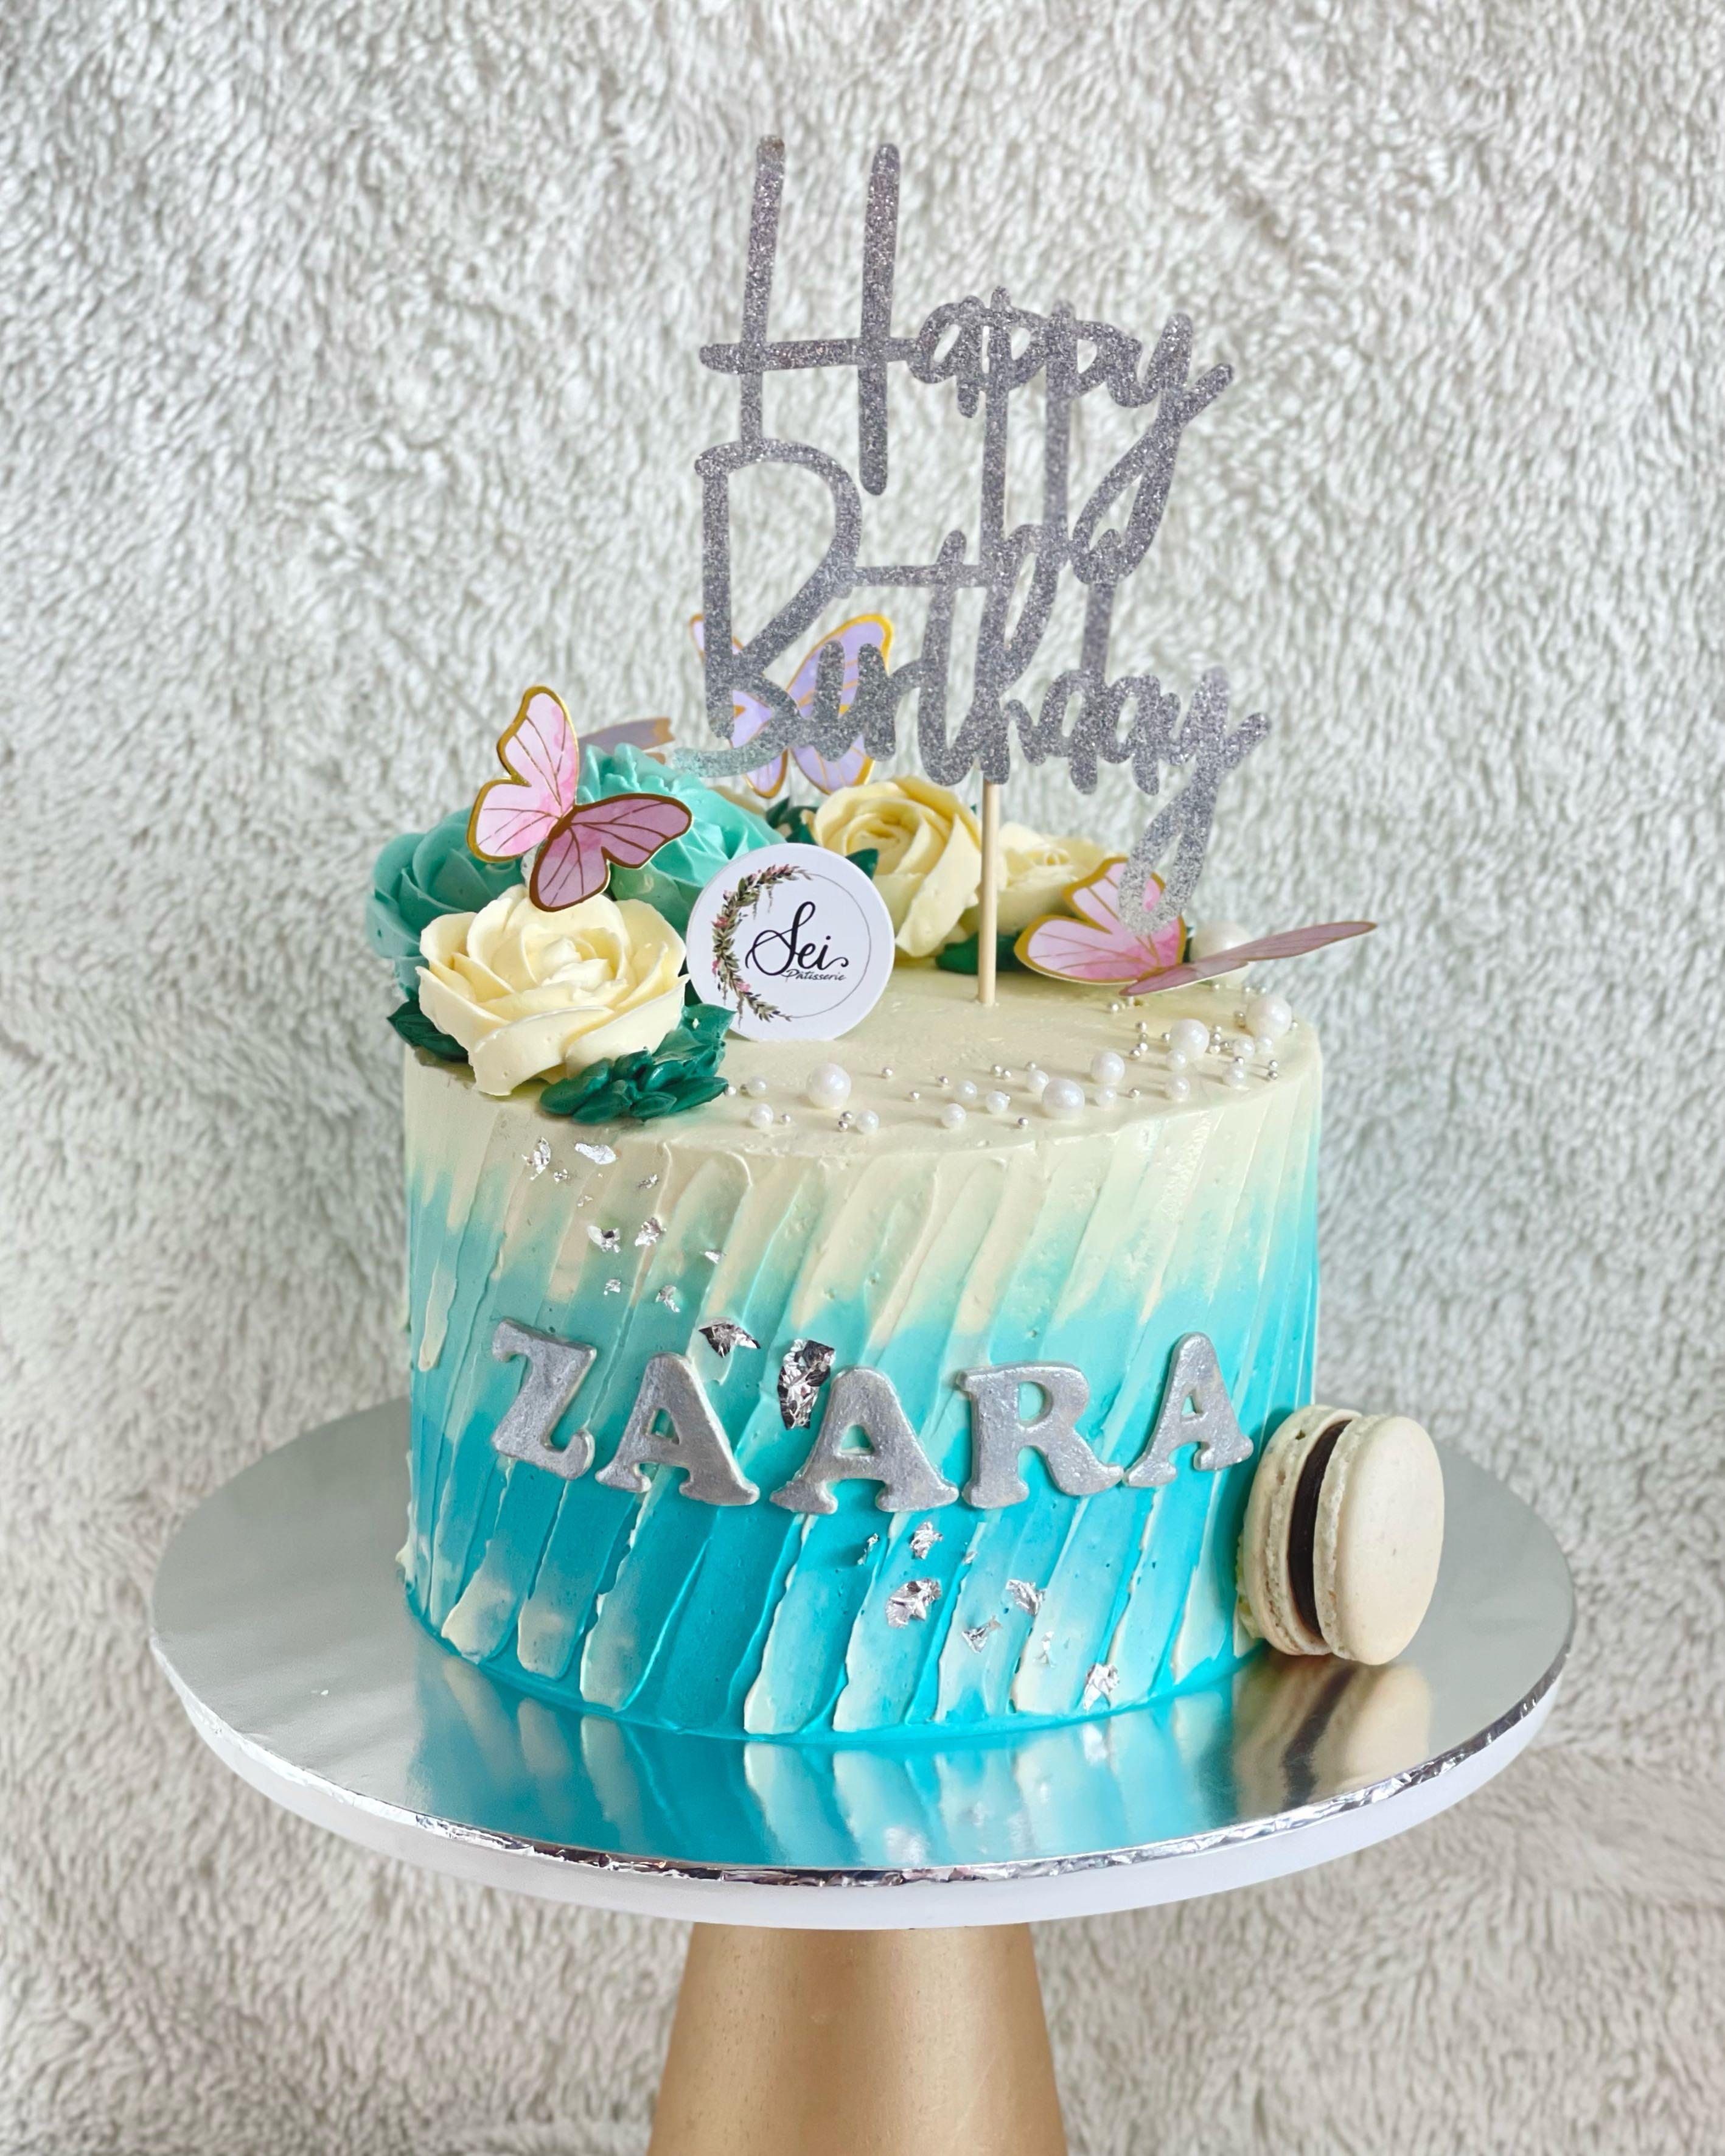 Happiest Birthday Flower Cake at From You Flowers